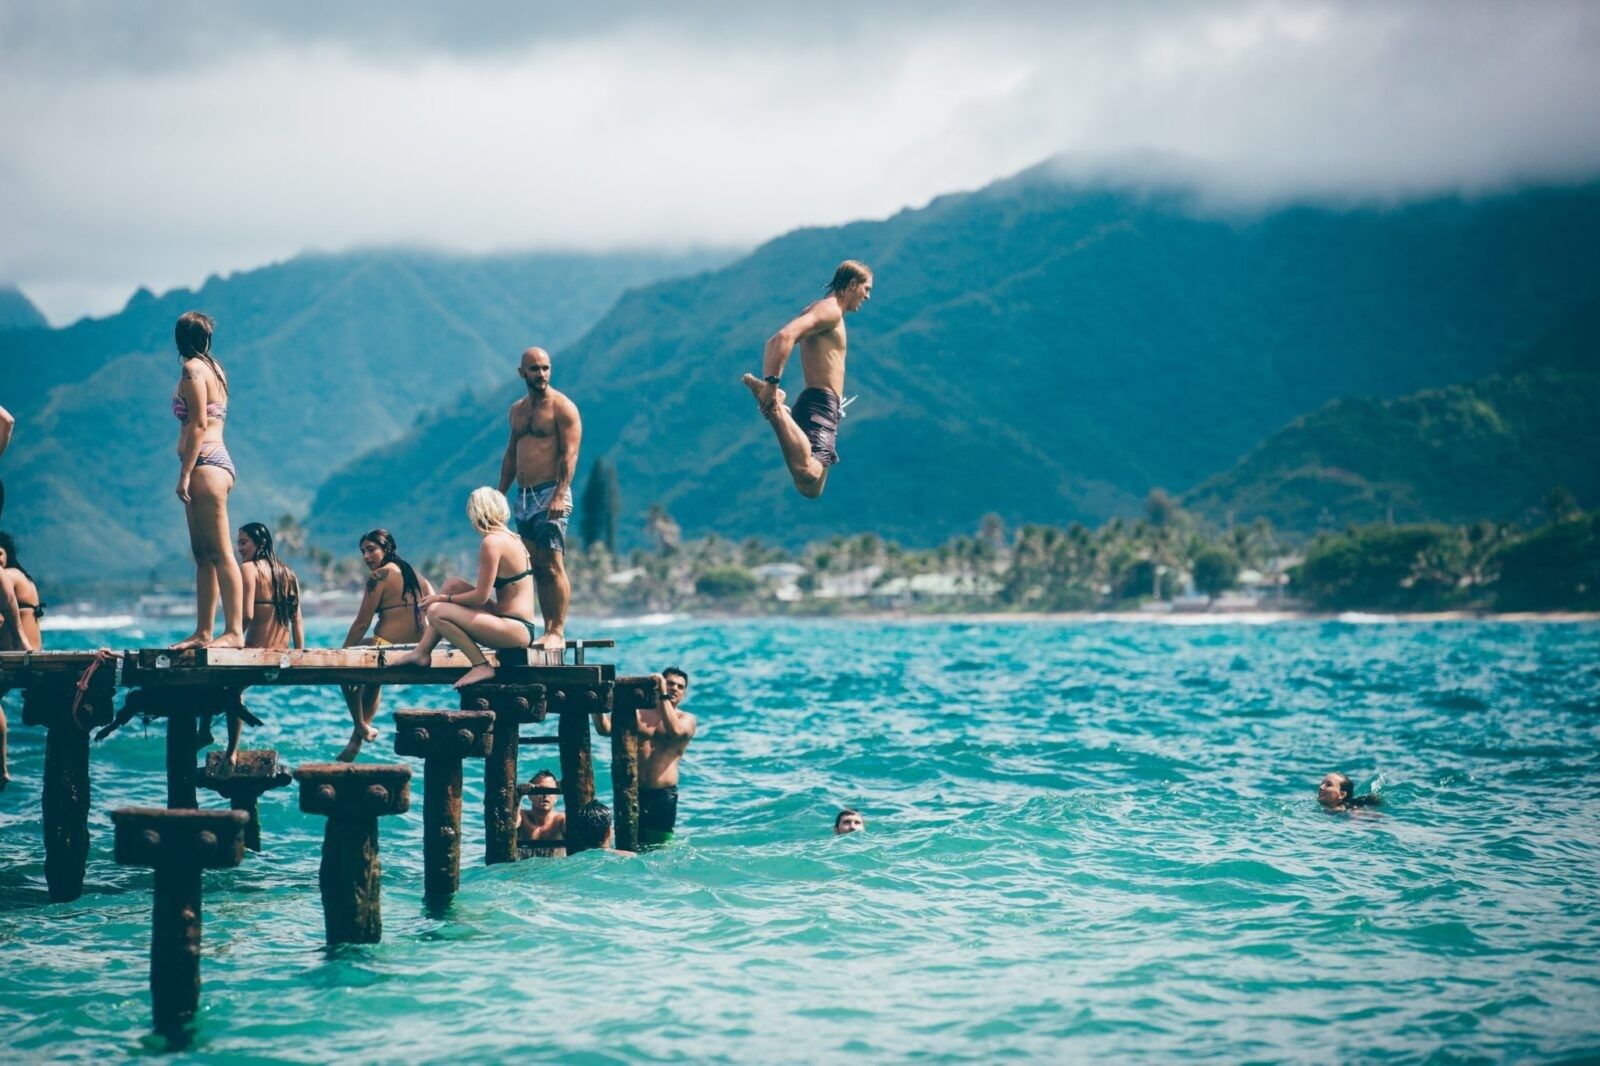 man-jumping-into-lake-surrounded-friends